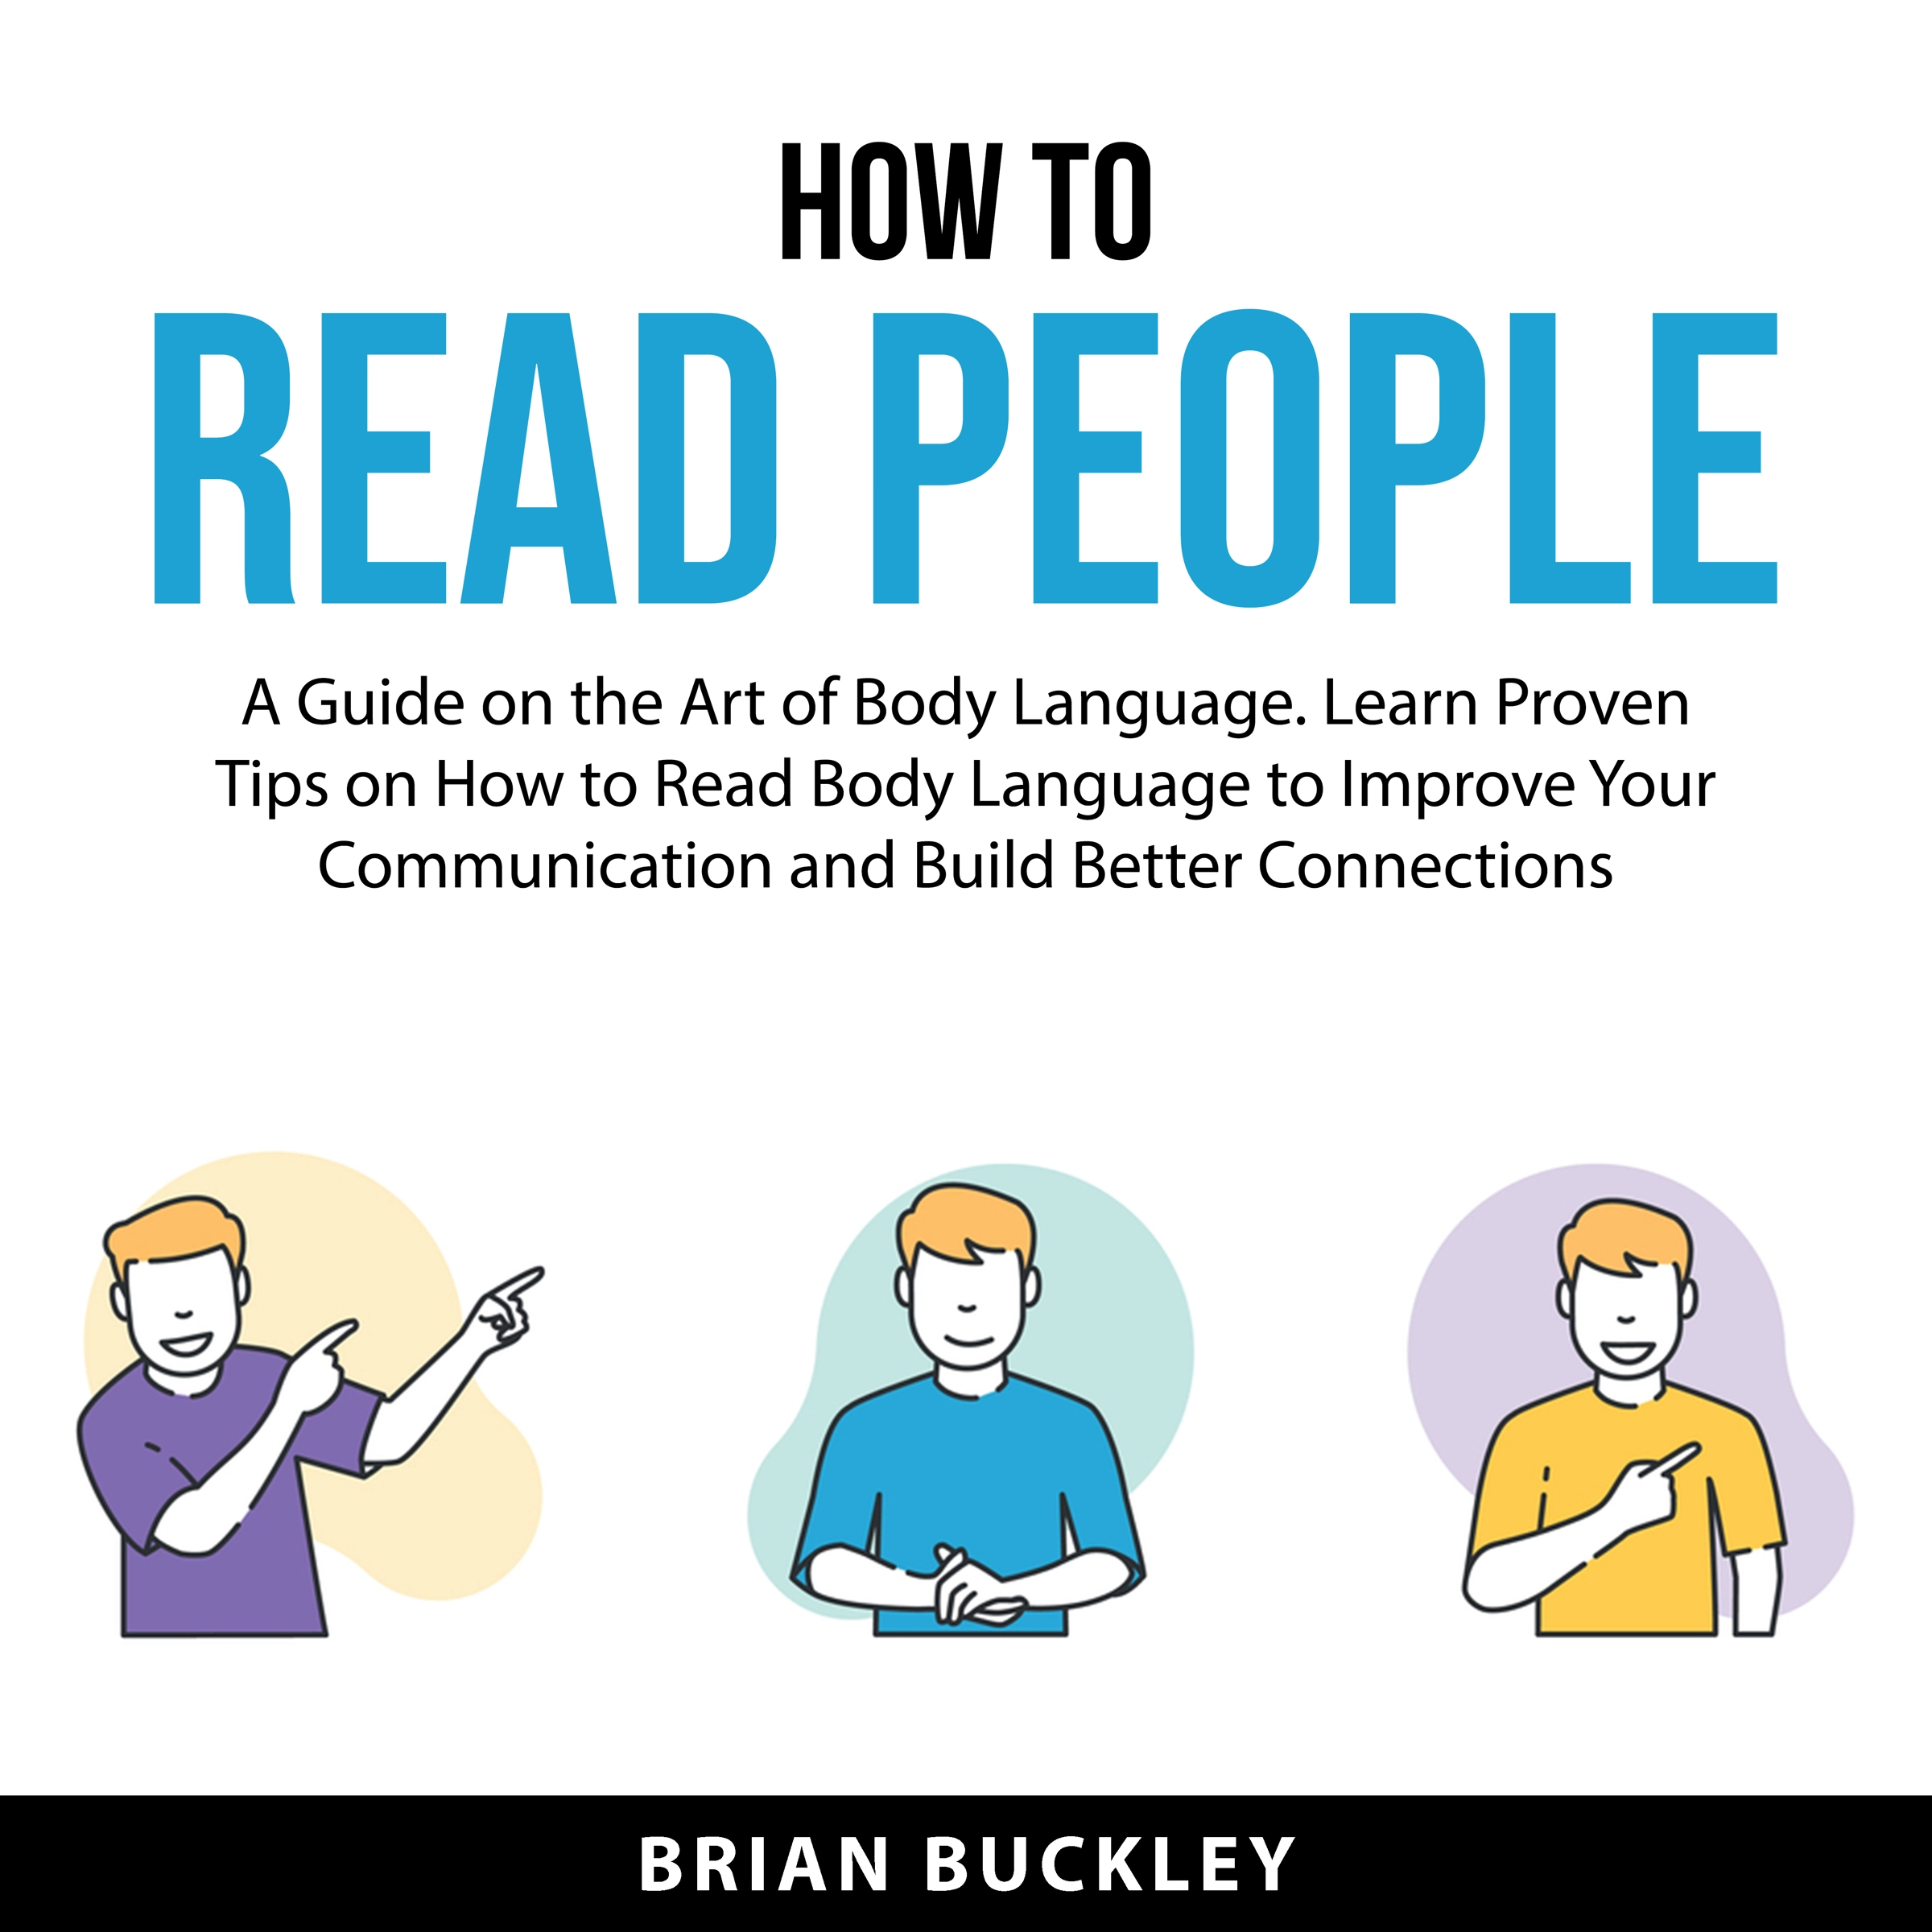 How to Read People Audiobook by Brian Buckley